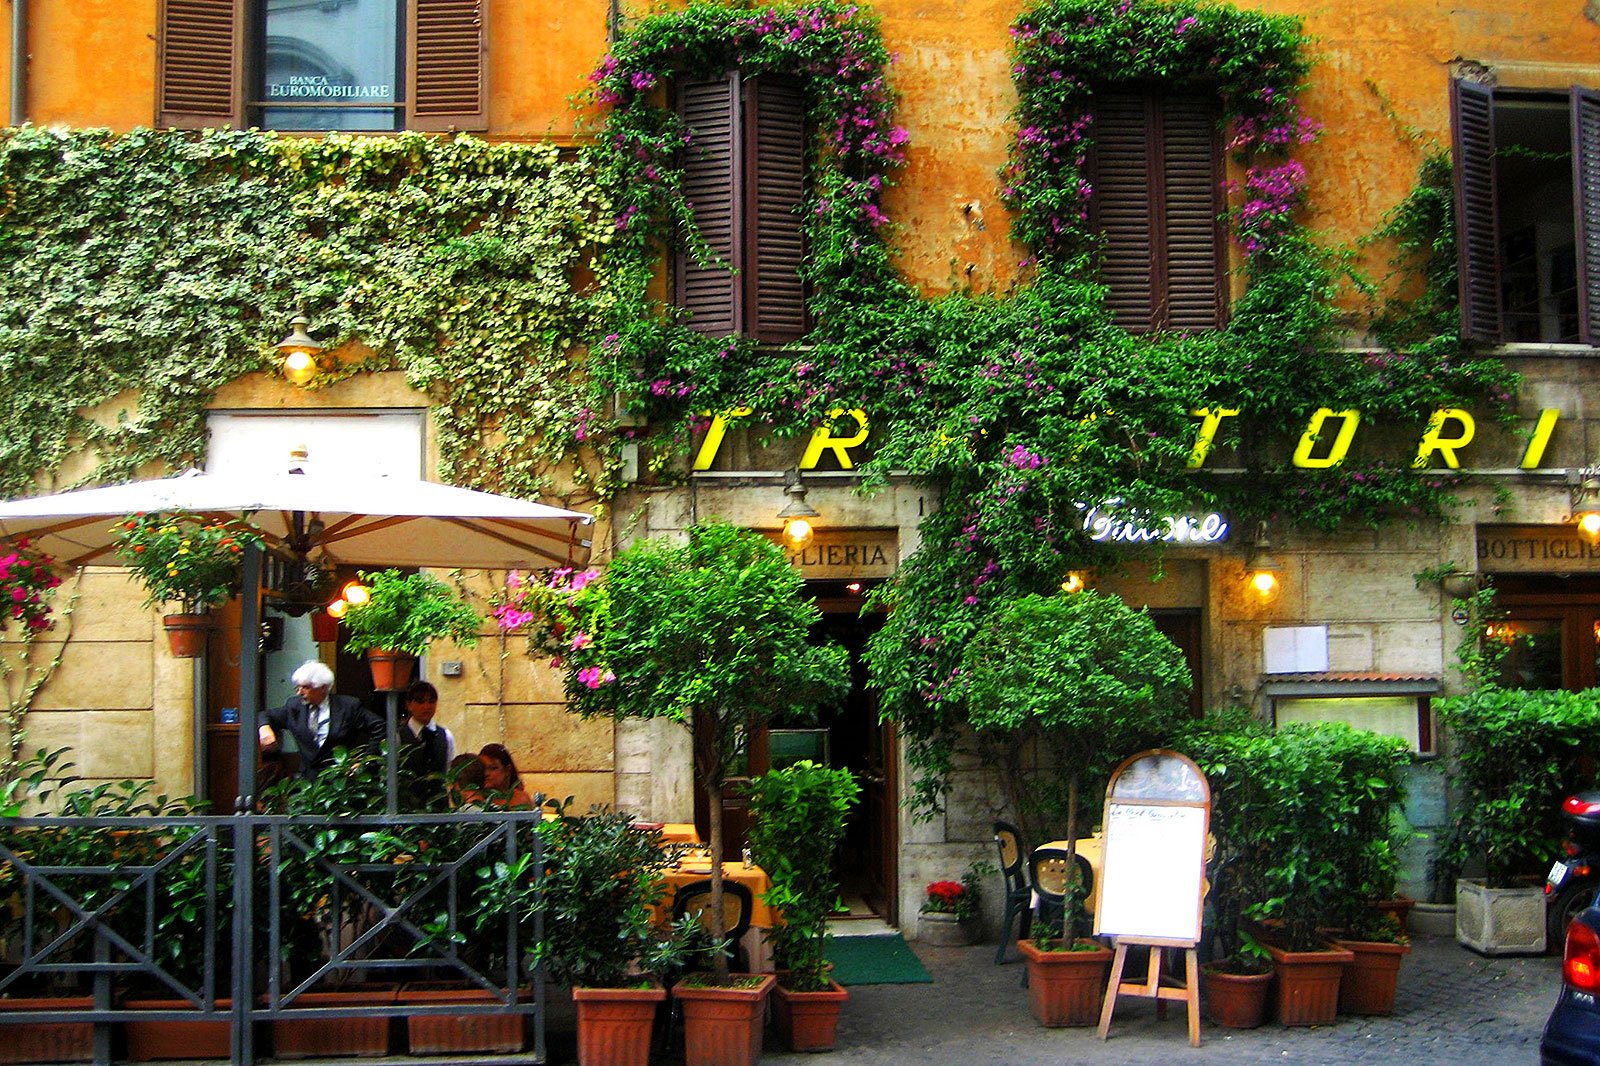 How to have a dinner in trattoria in Rome